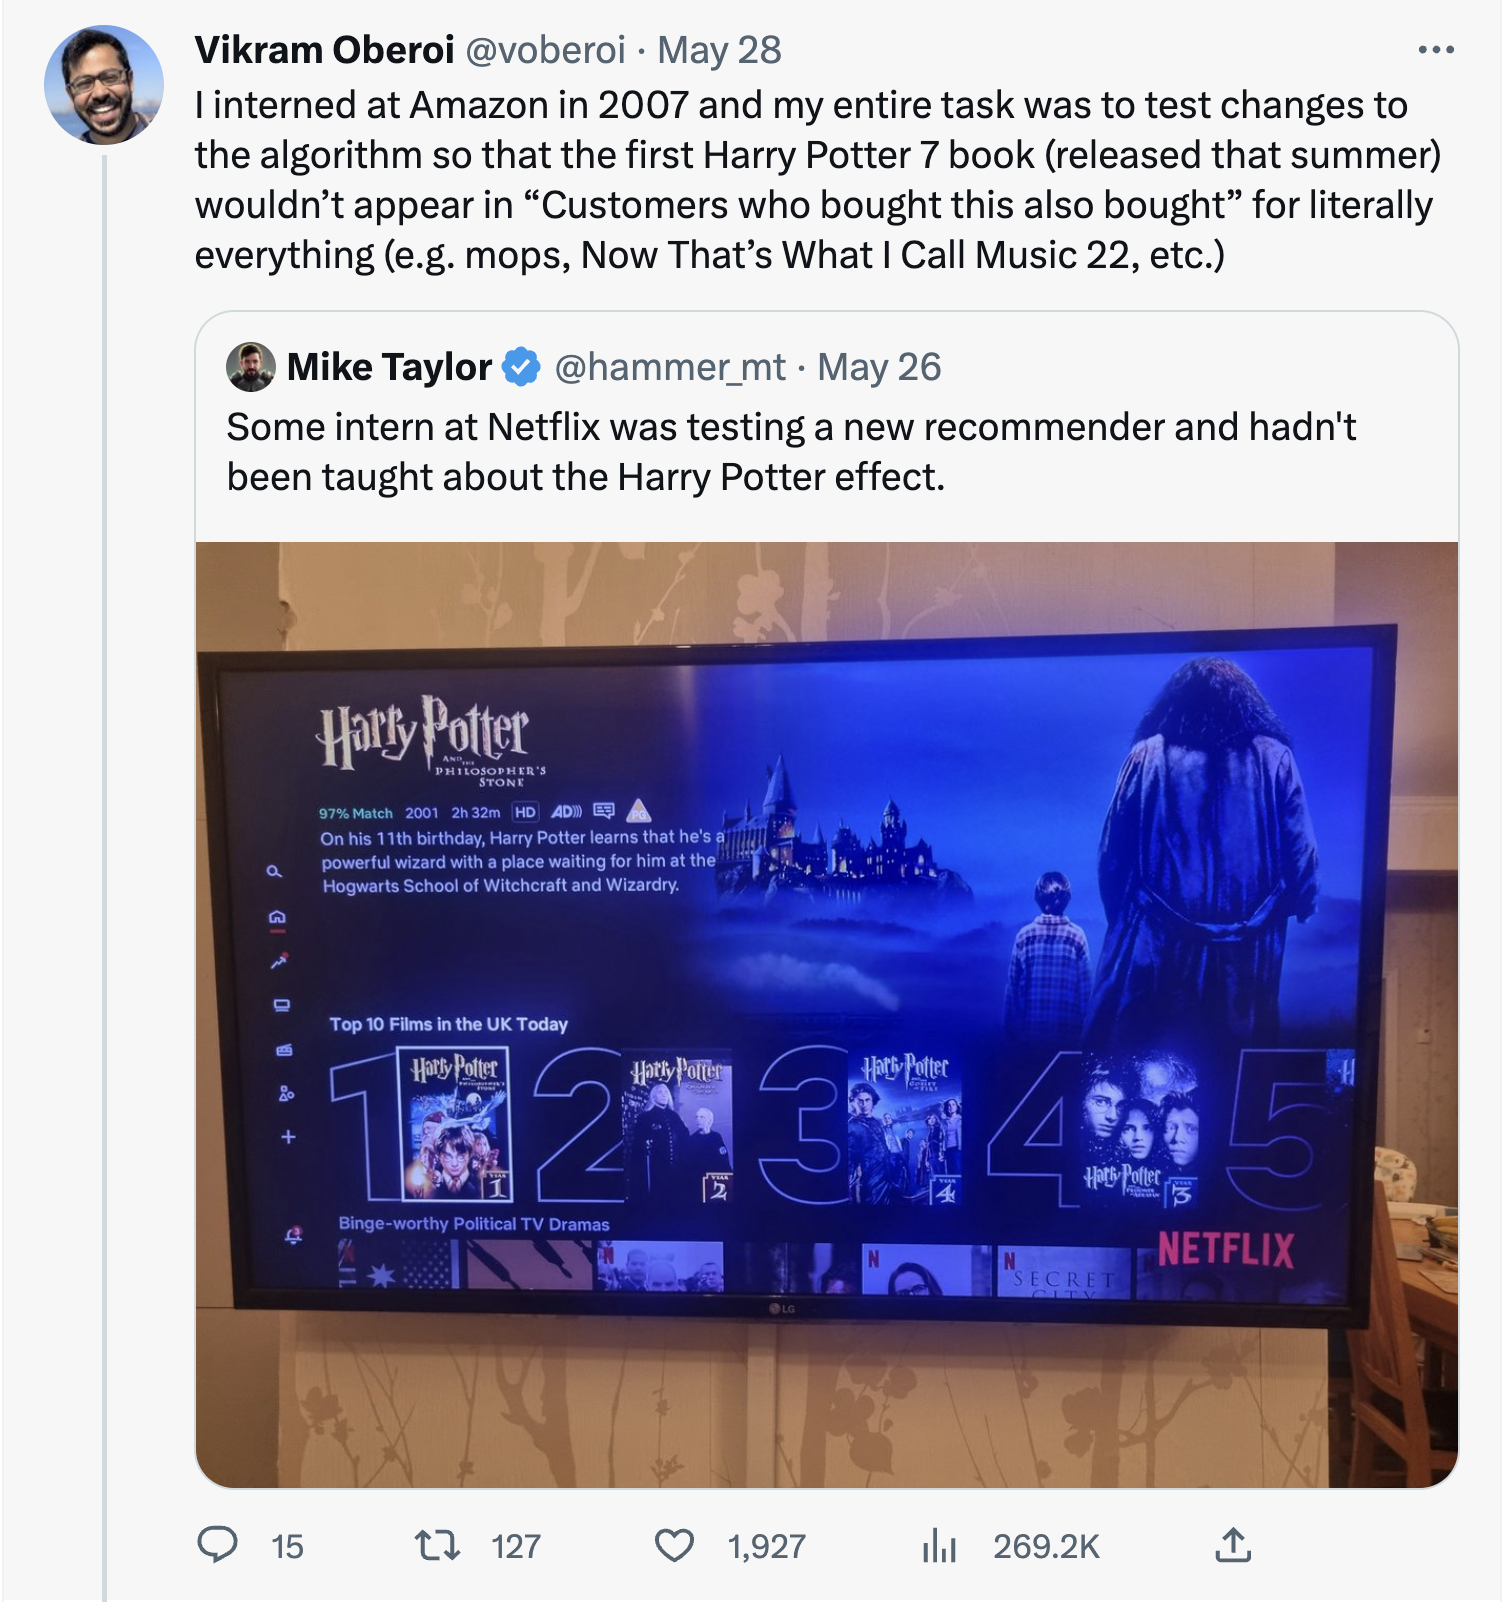 A screenshot of a tweet by the author stating &ldquo;I interned at Amazon in 2007 and his entire task was to test changes to the algorithm so that the first Harry Potter 7 book (released that summer) wouldn&rsquo;t appear in &lsquo;Customers who bought this also bought&rsquo; for literally everything (e.g. mops, Now That&rsquo;s What I Call Music 22, etc.)&rdquo;